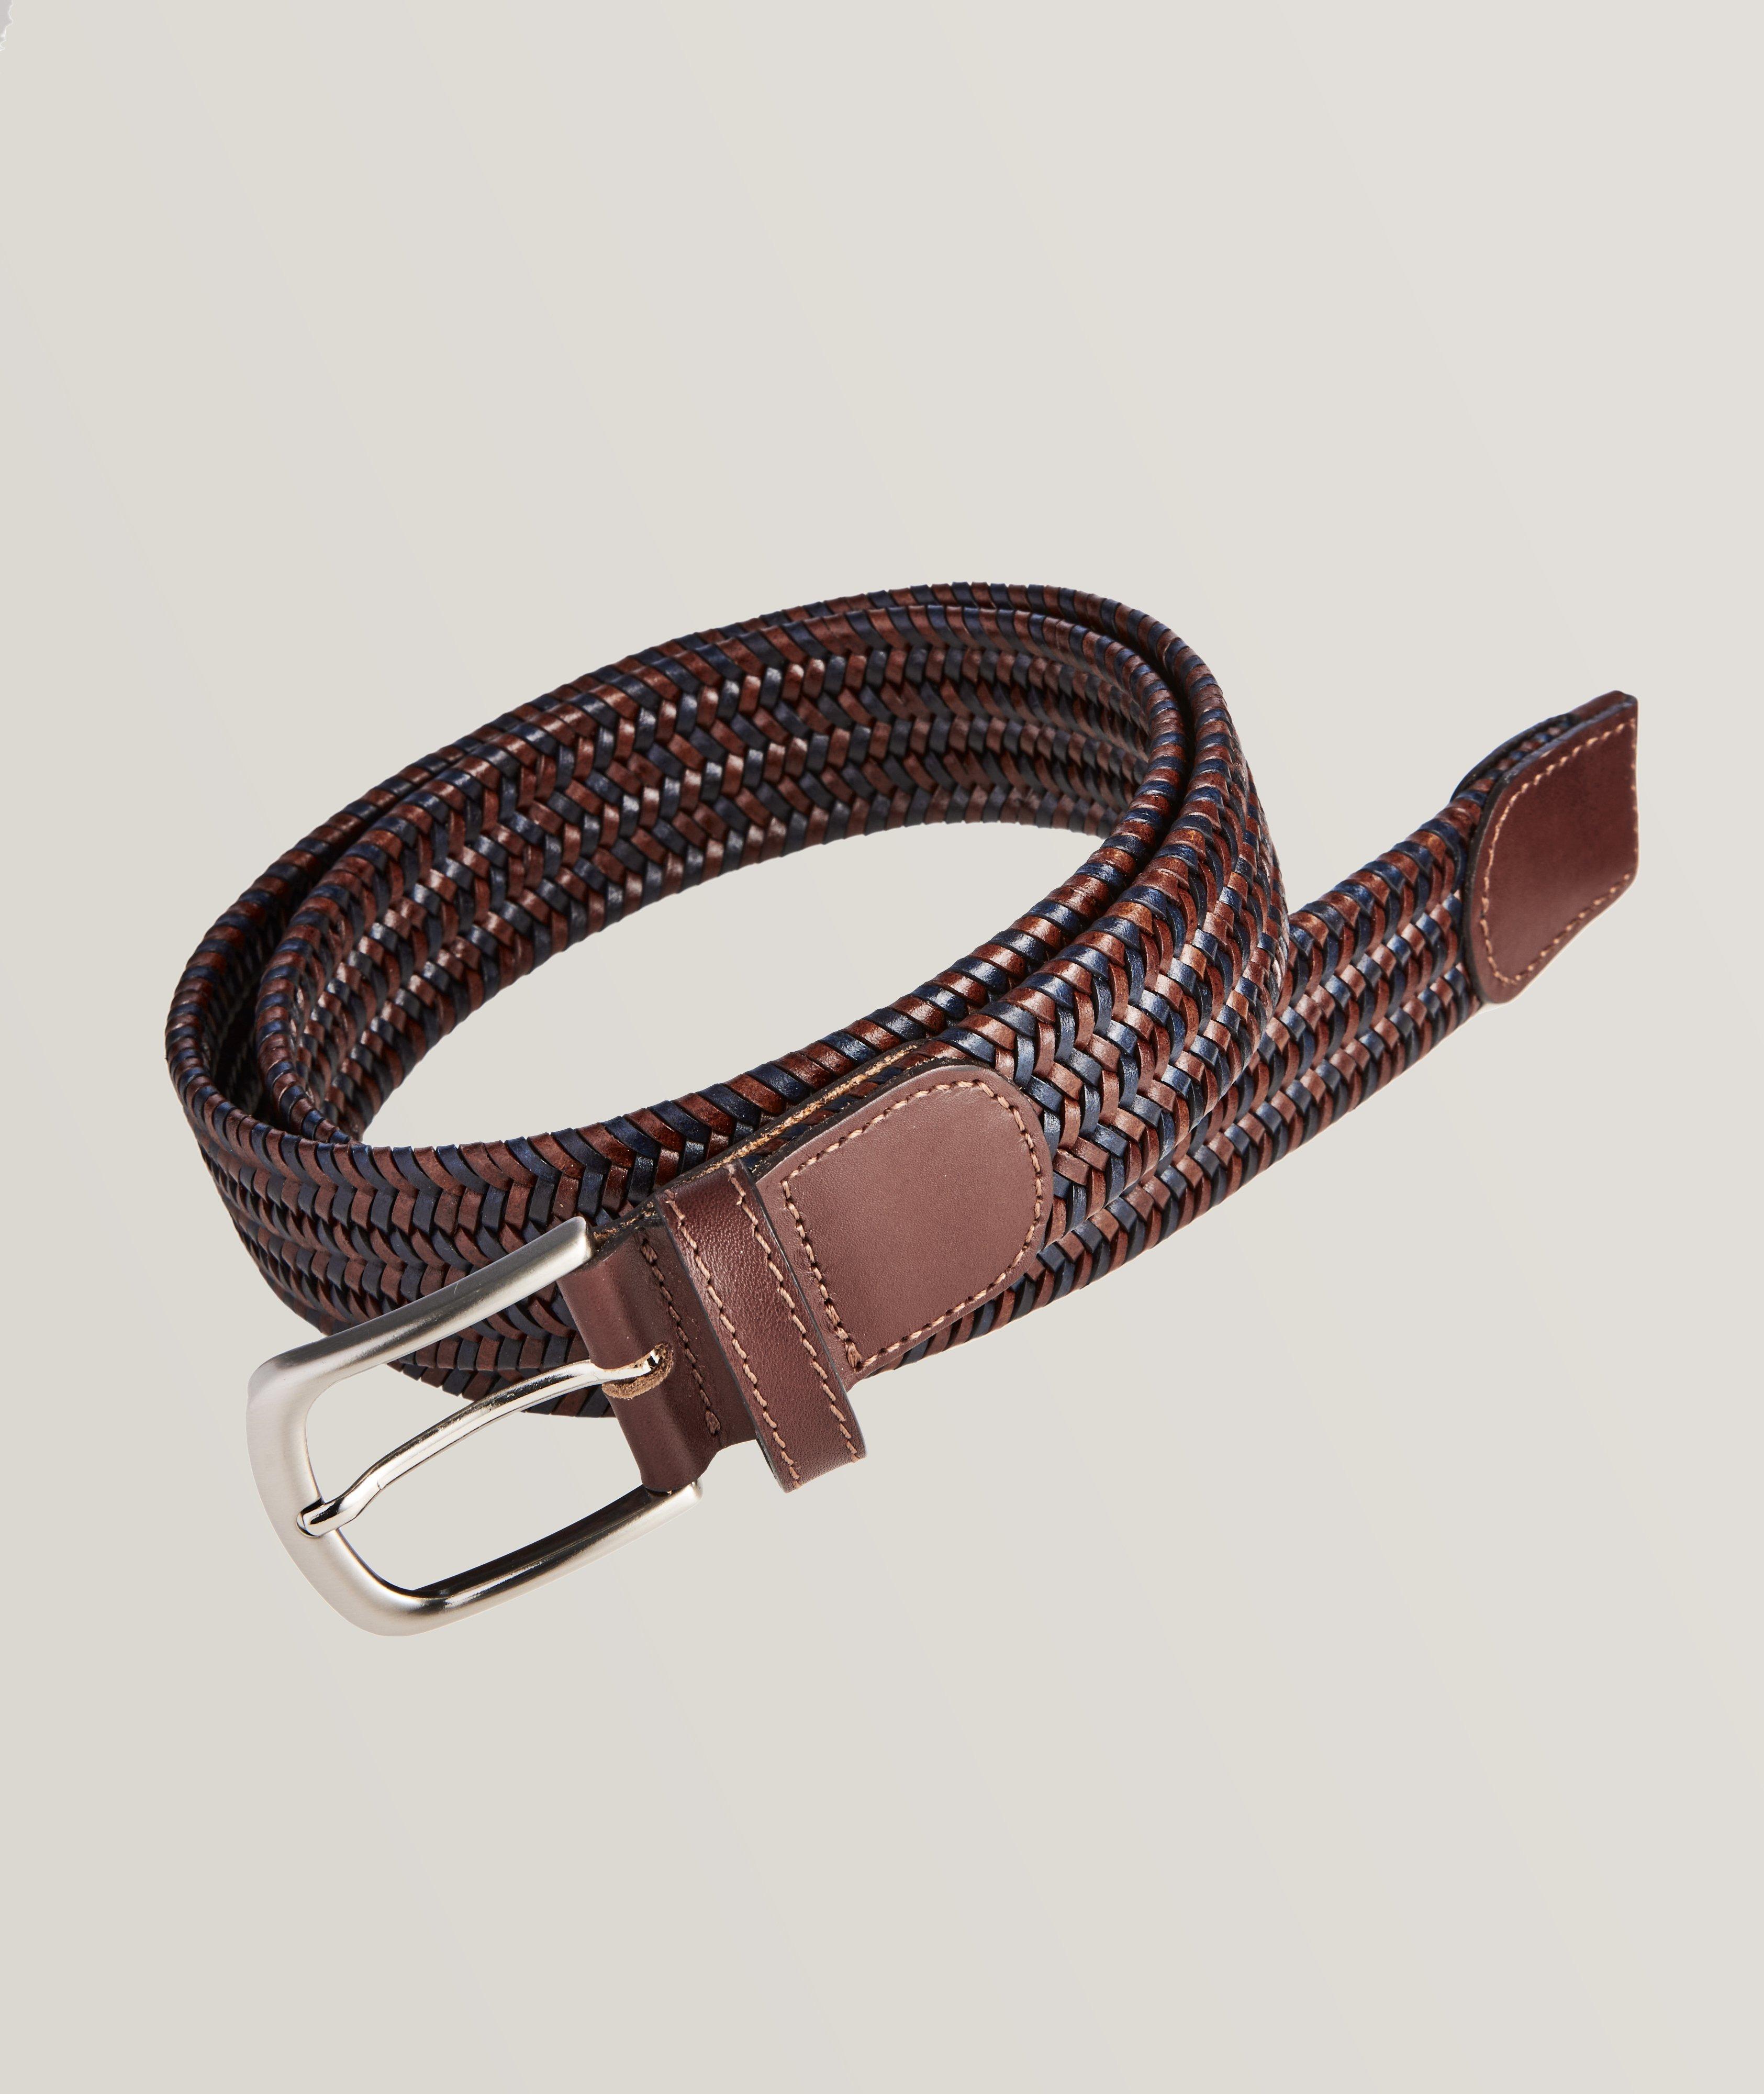 Stretch Woven Leather Belt image 0